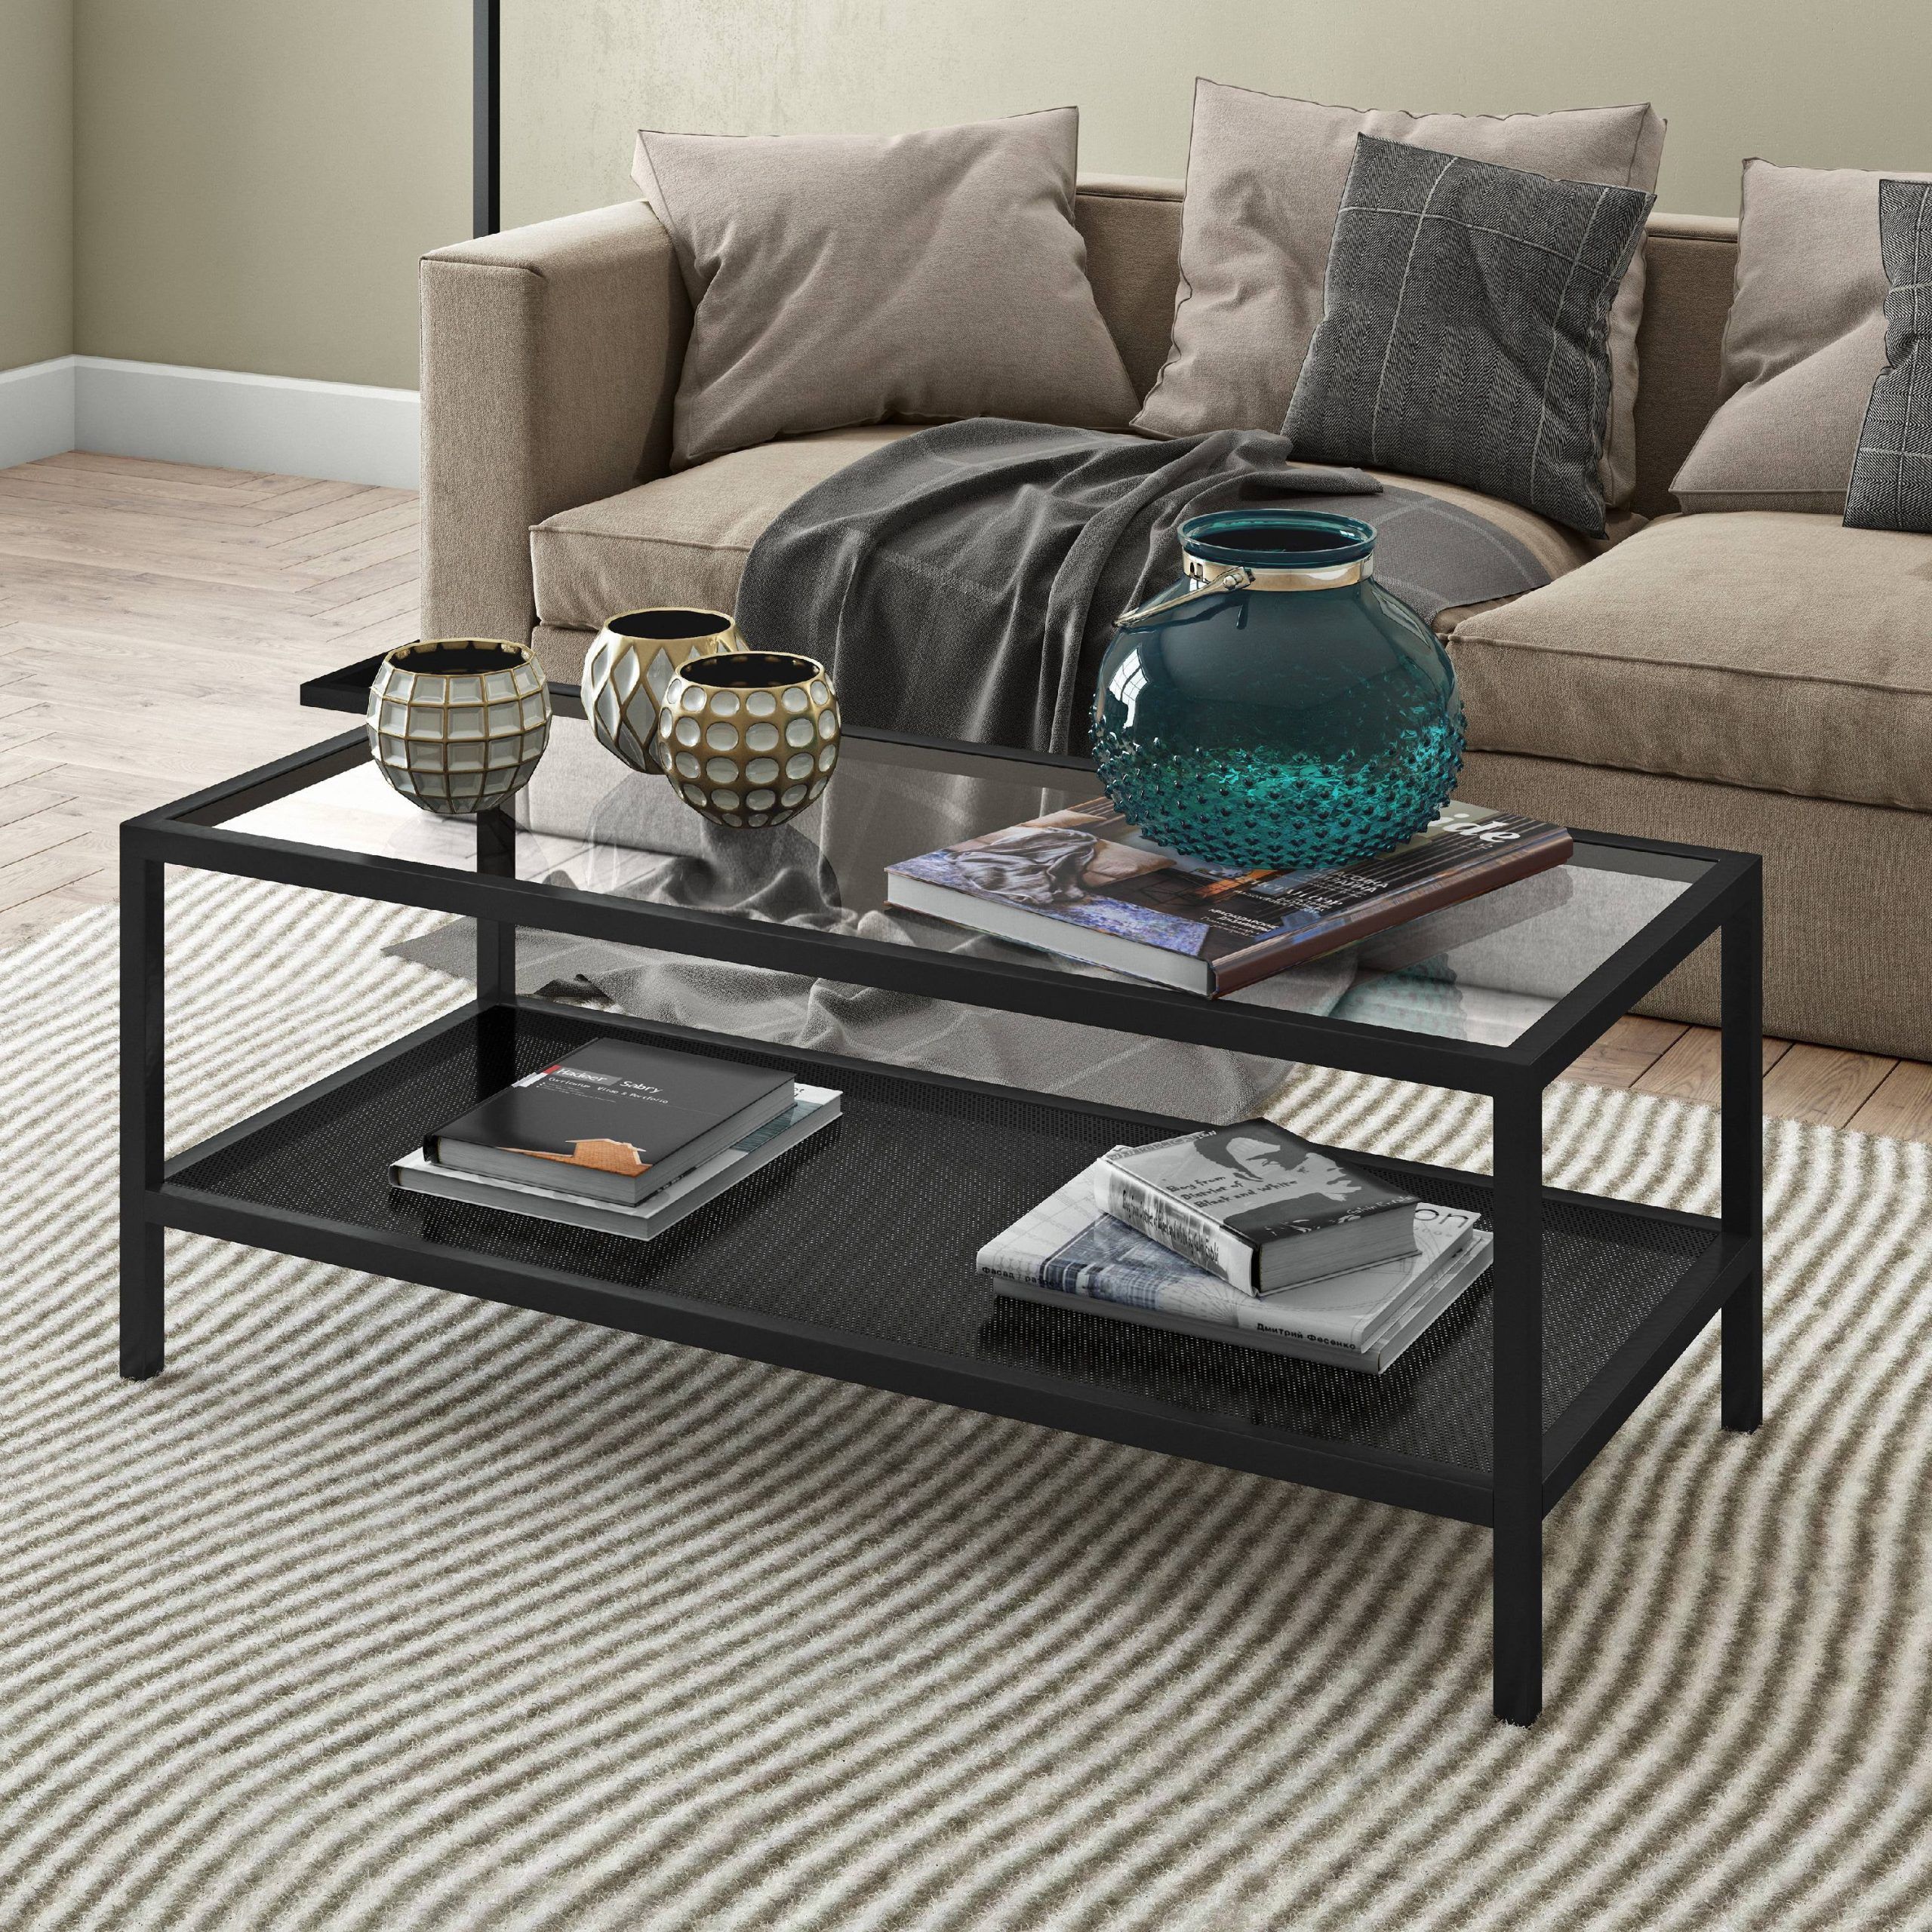 Evelyn&zoe Contemporary Metal Coffee Table With Glass Top – Walmart Intended For Glossy Finished Metal Coffee Tables (View 4 of 20)